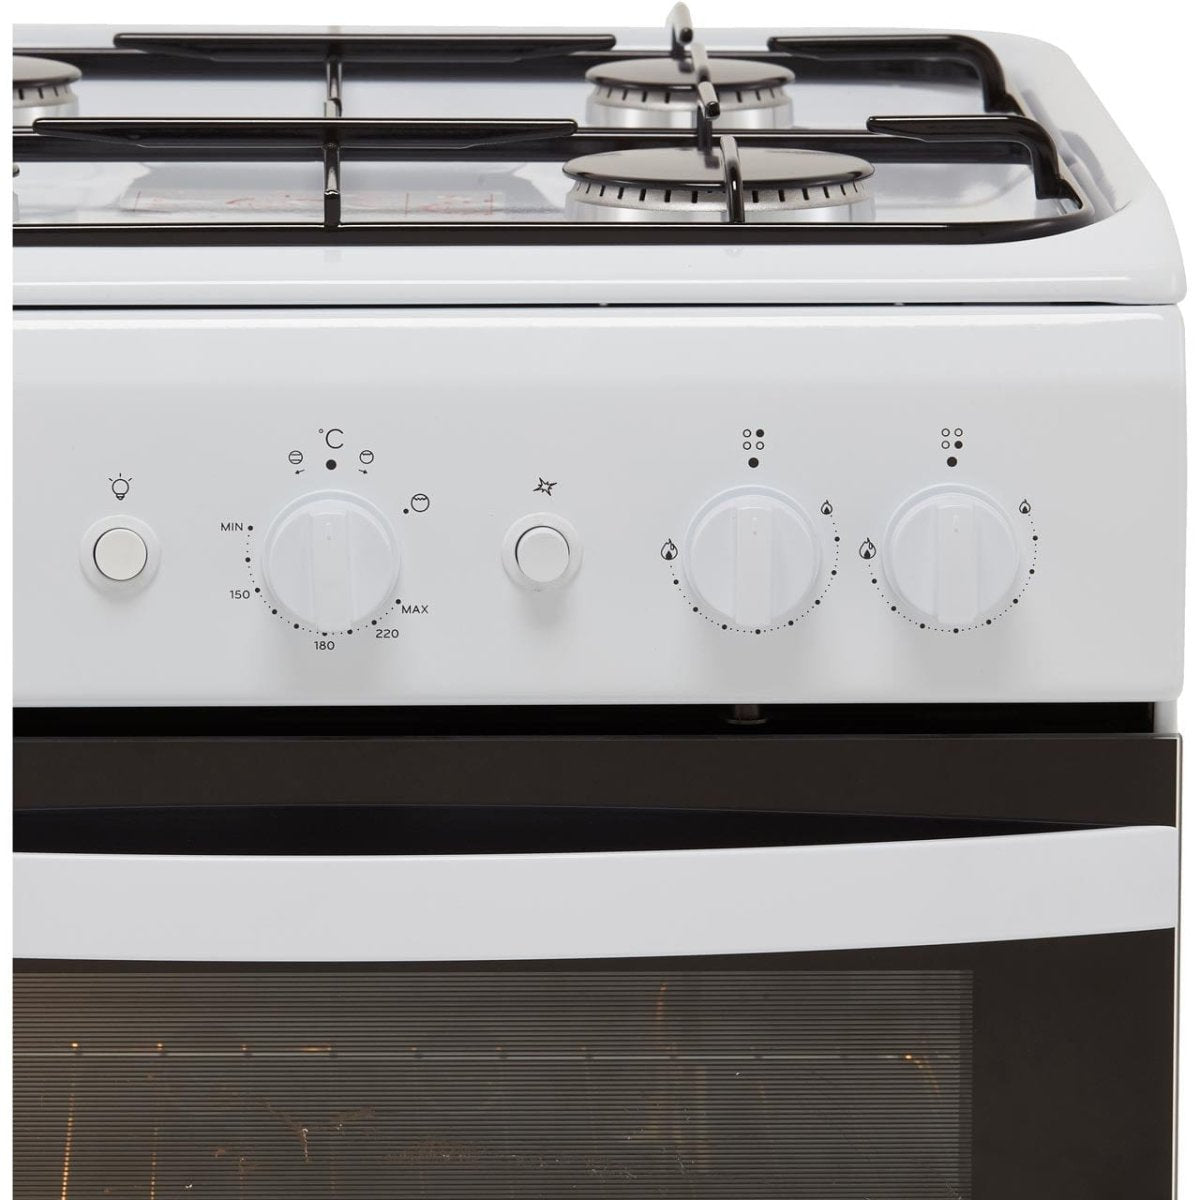 Indesit Cloe IS5G1KMW 50cm Gas Cooker - White - A Rated - Atlantic Electrics